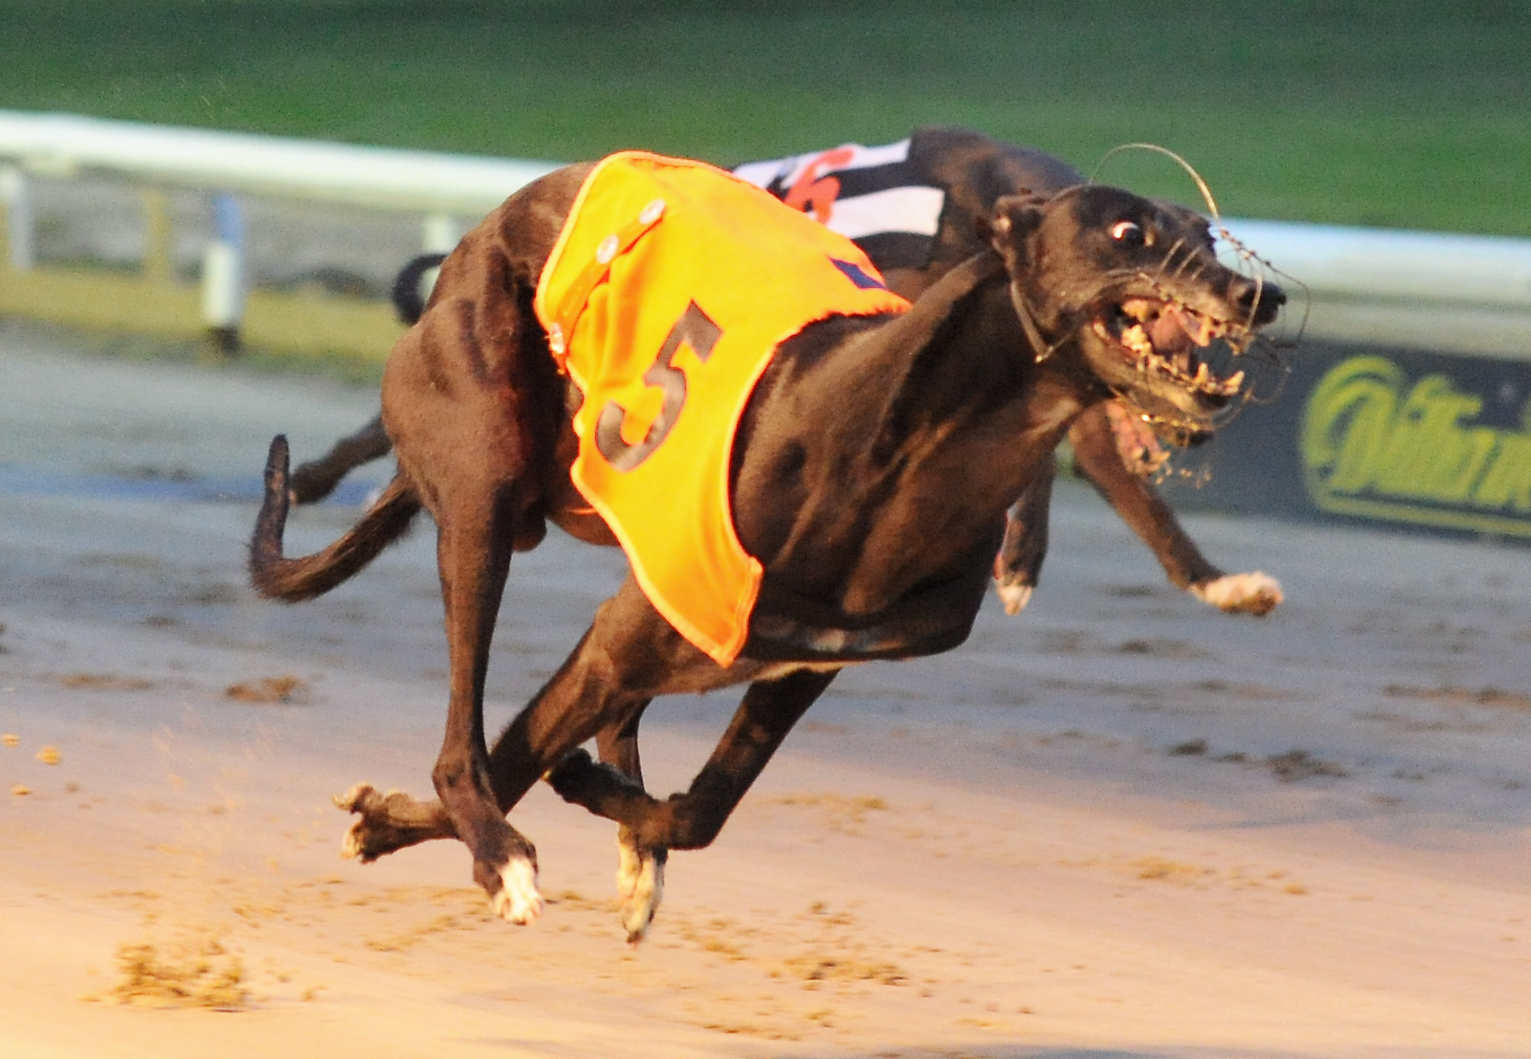 East anglian greyhound derby betting odds what is the price of bitcoin now